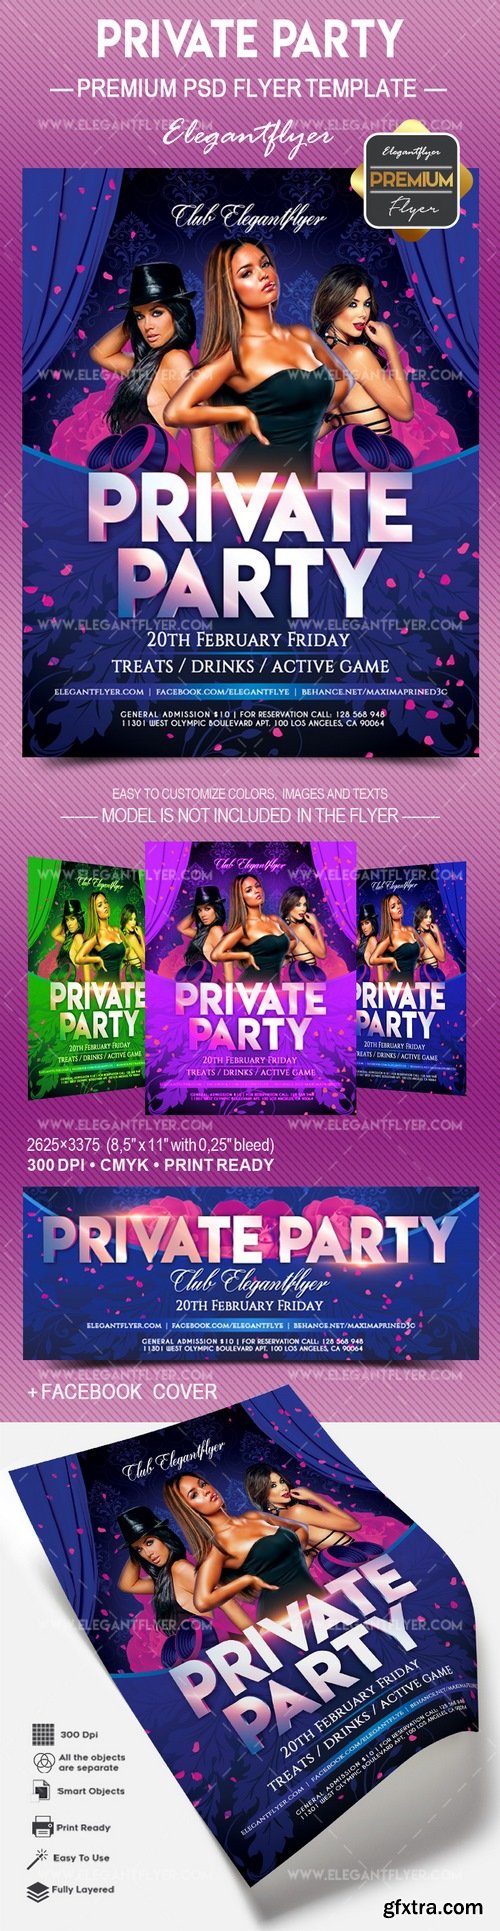 Private Party – Flyer PSD Template + Facebook Cover